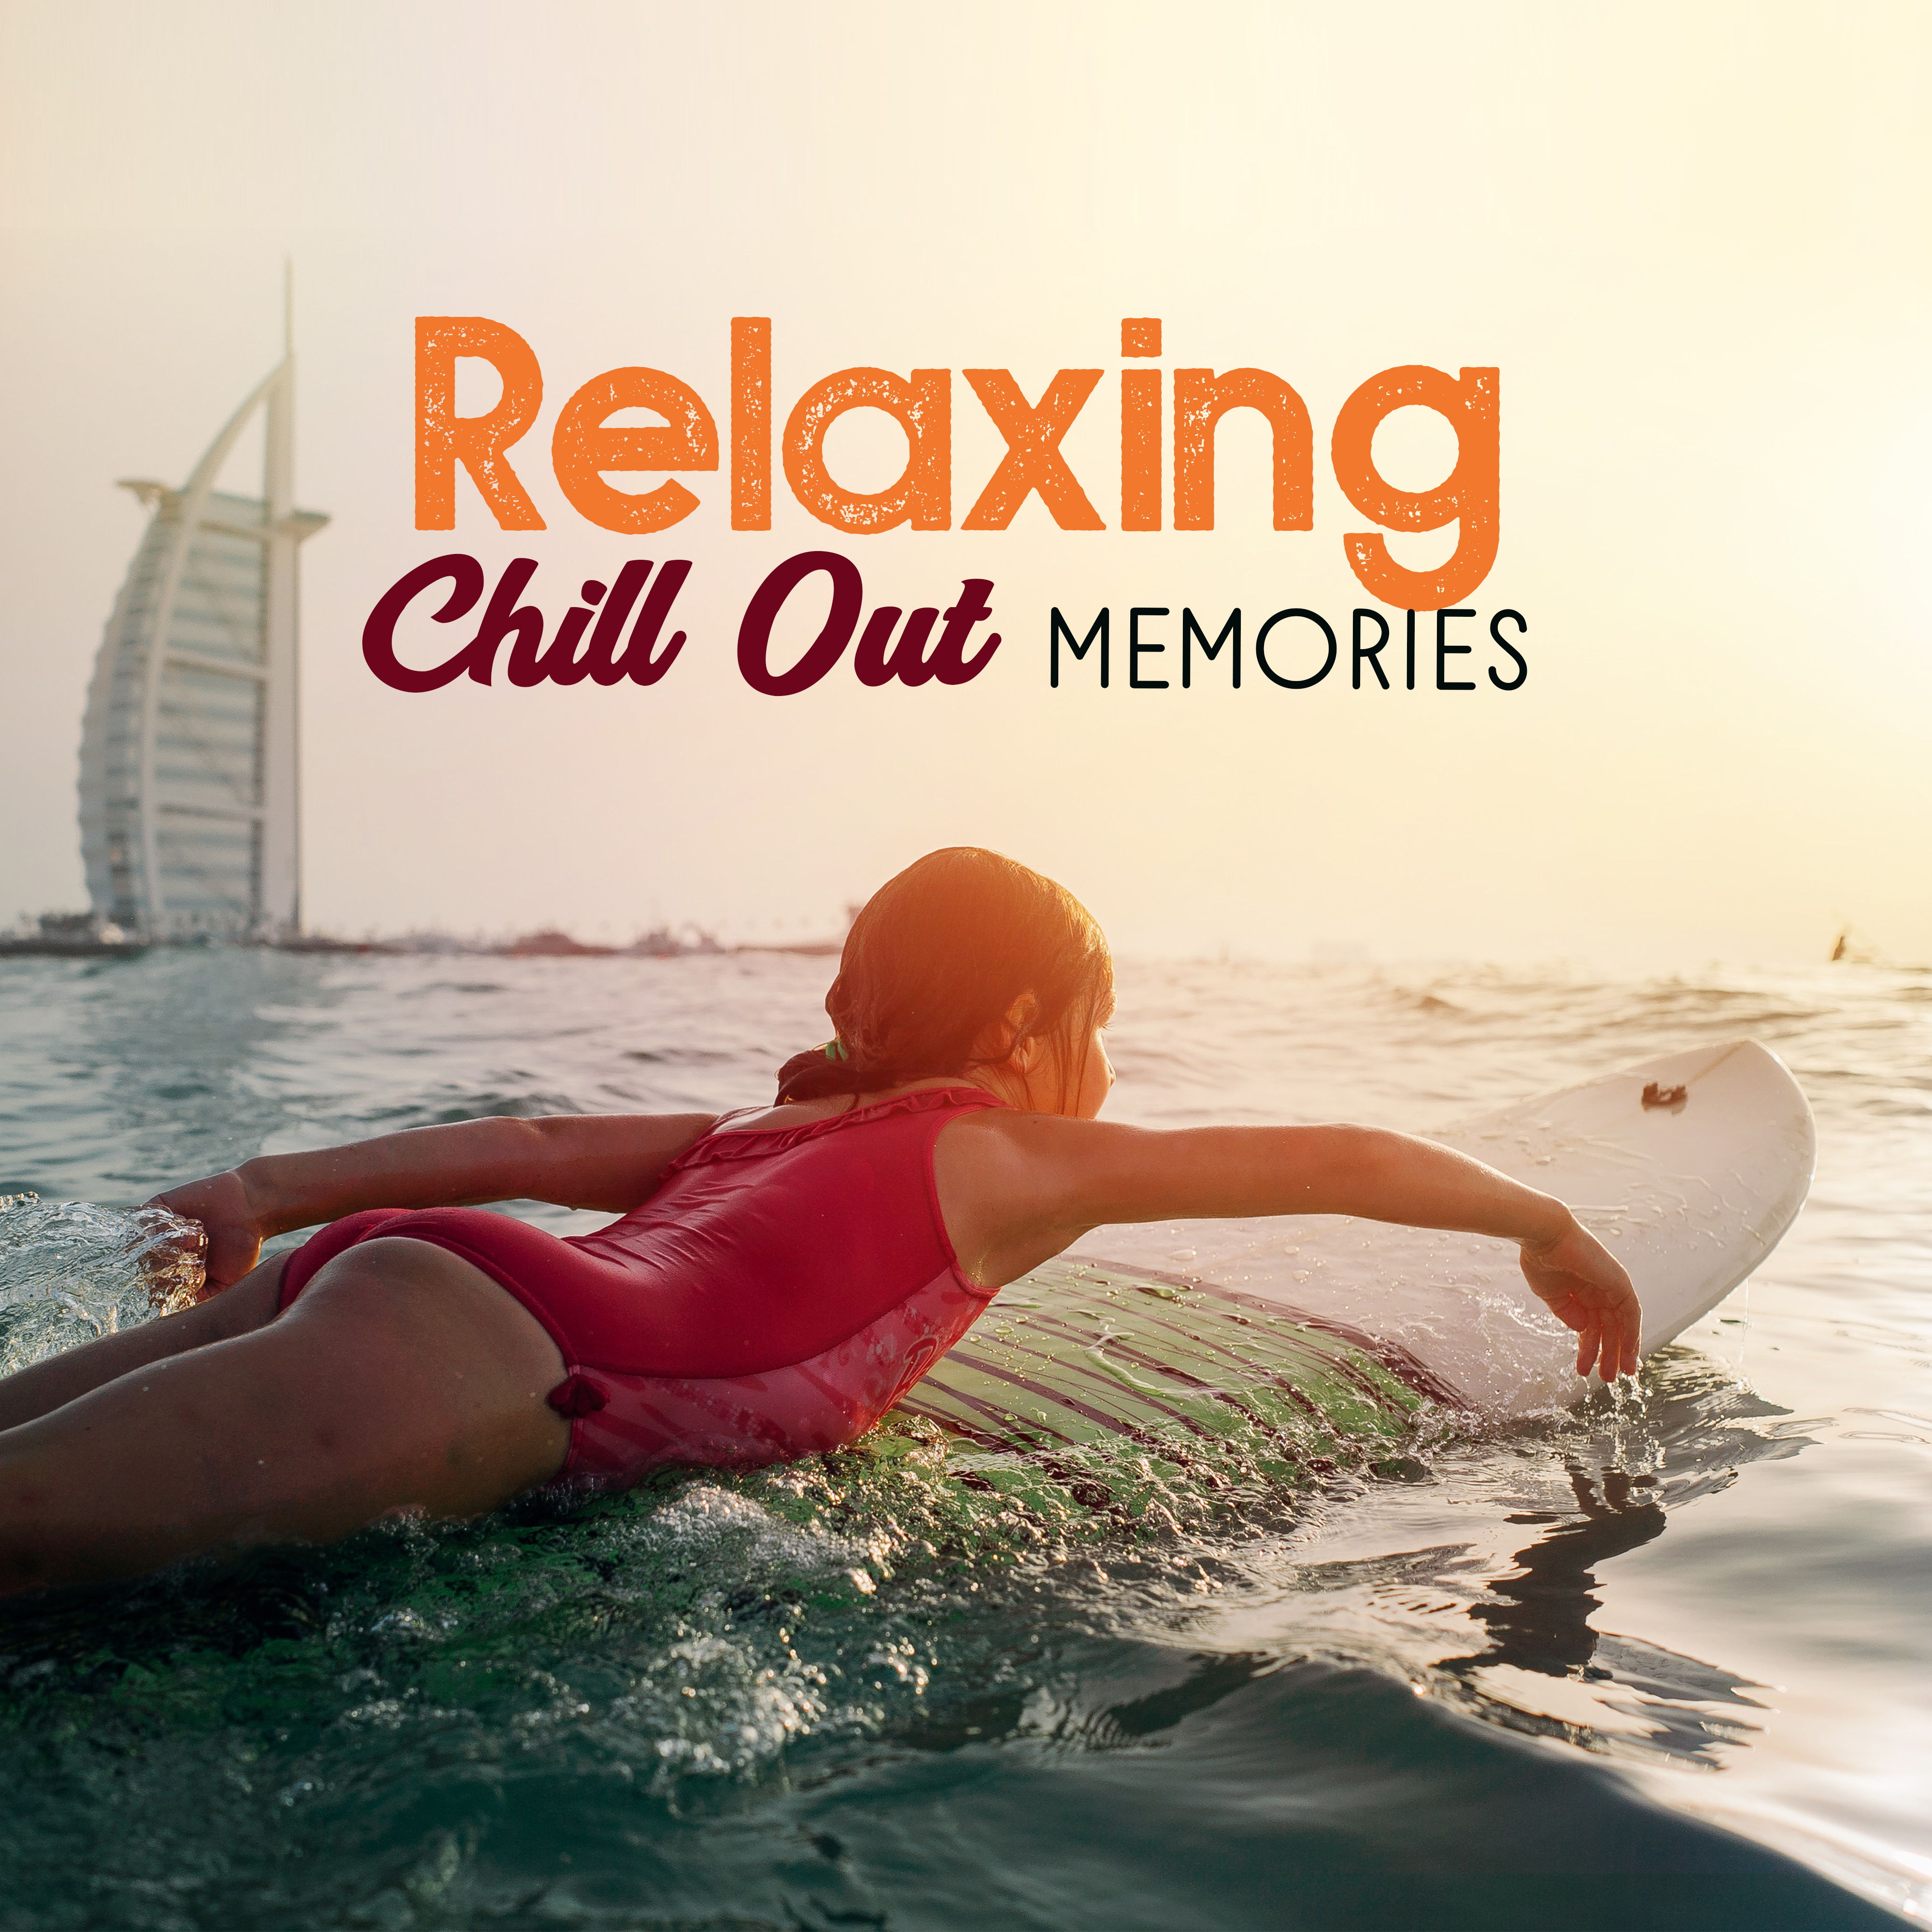 Relaxing Chill Out Memories  Summer Songs, Chill Out Music, Stress Relief, Peaceful Sounds